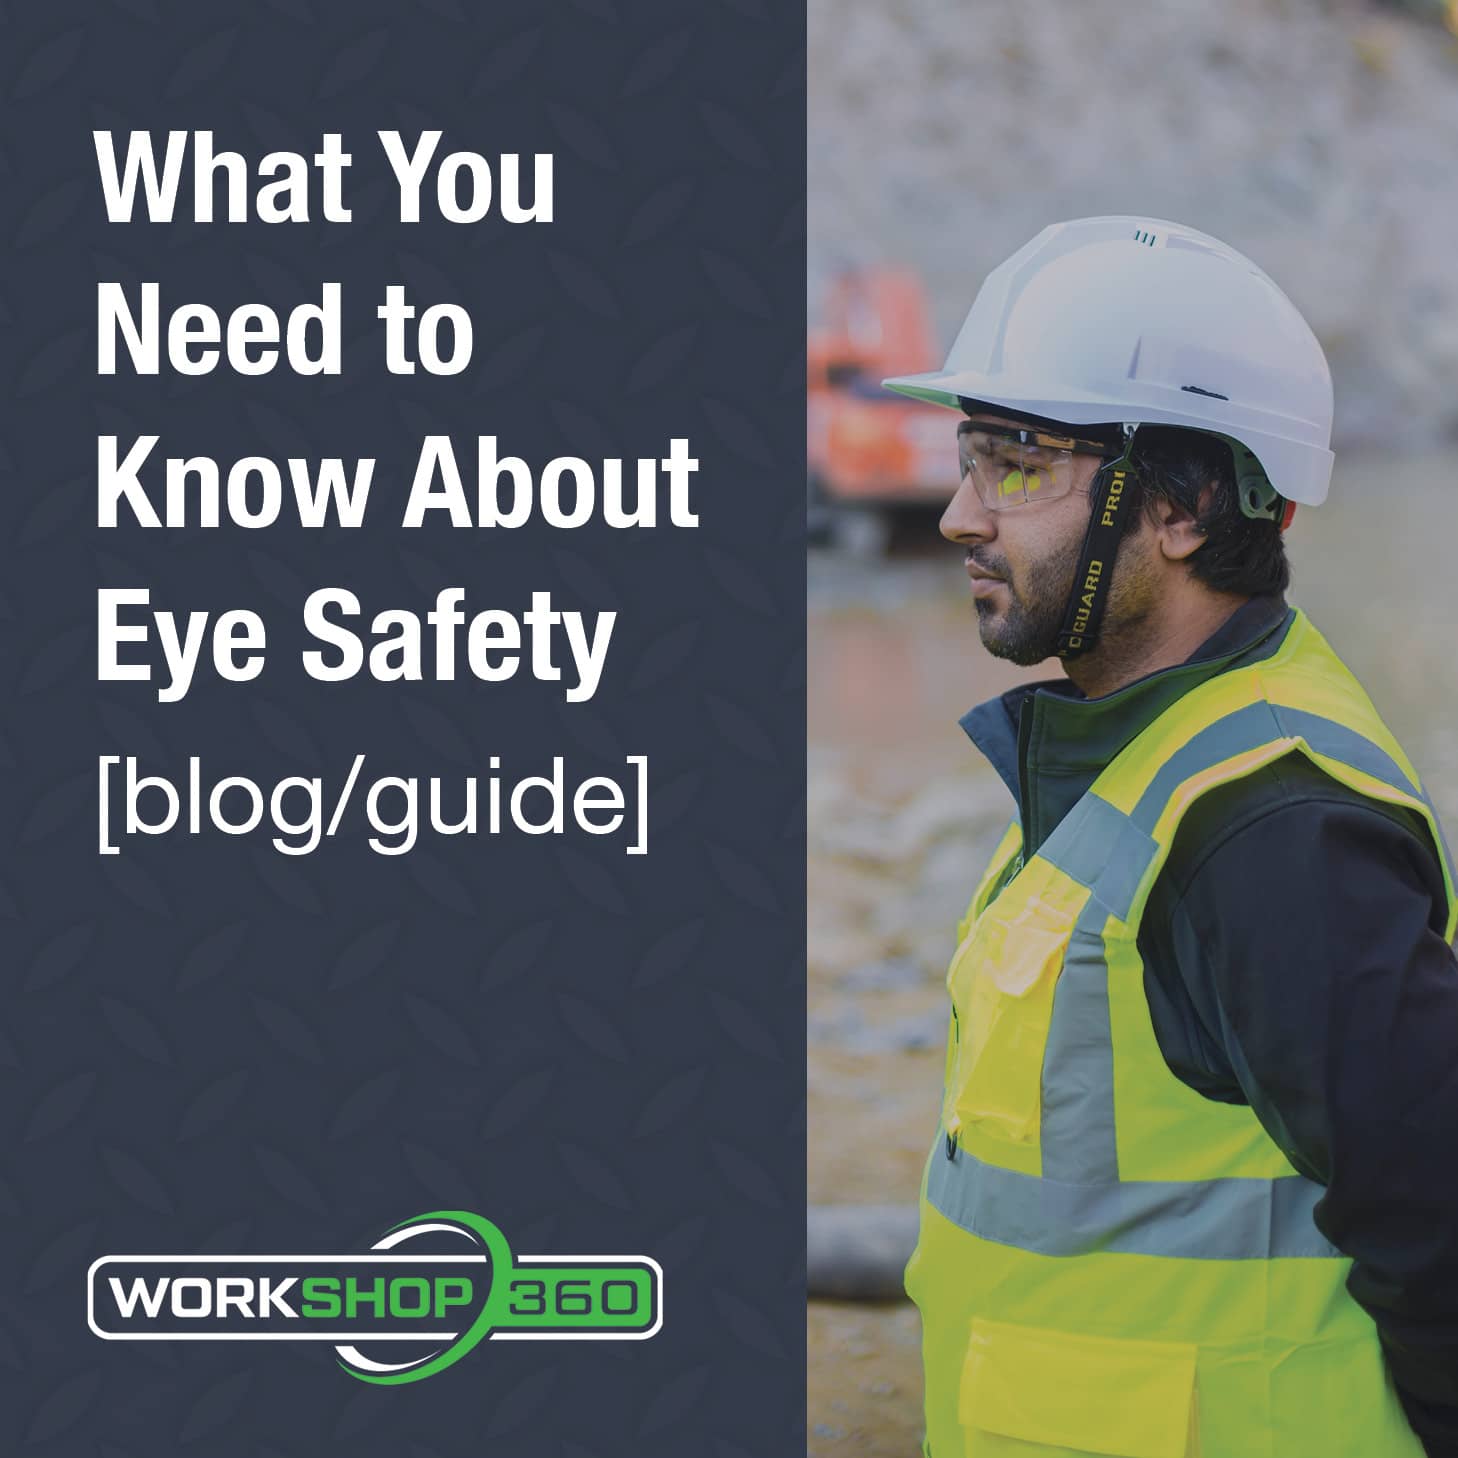 What You Need to Know About Eye Safety